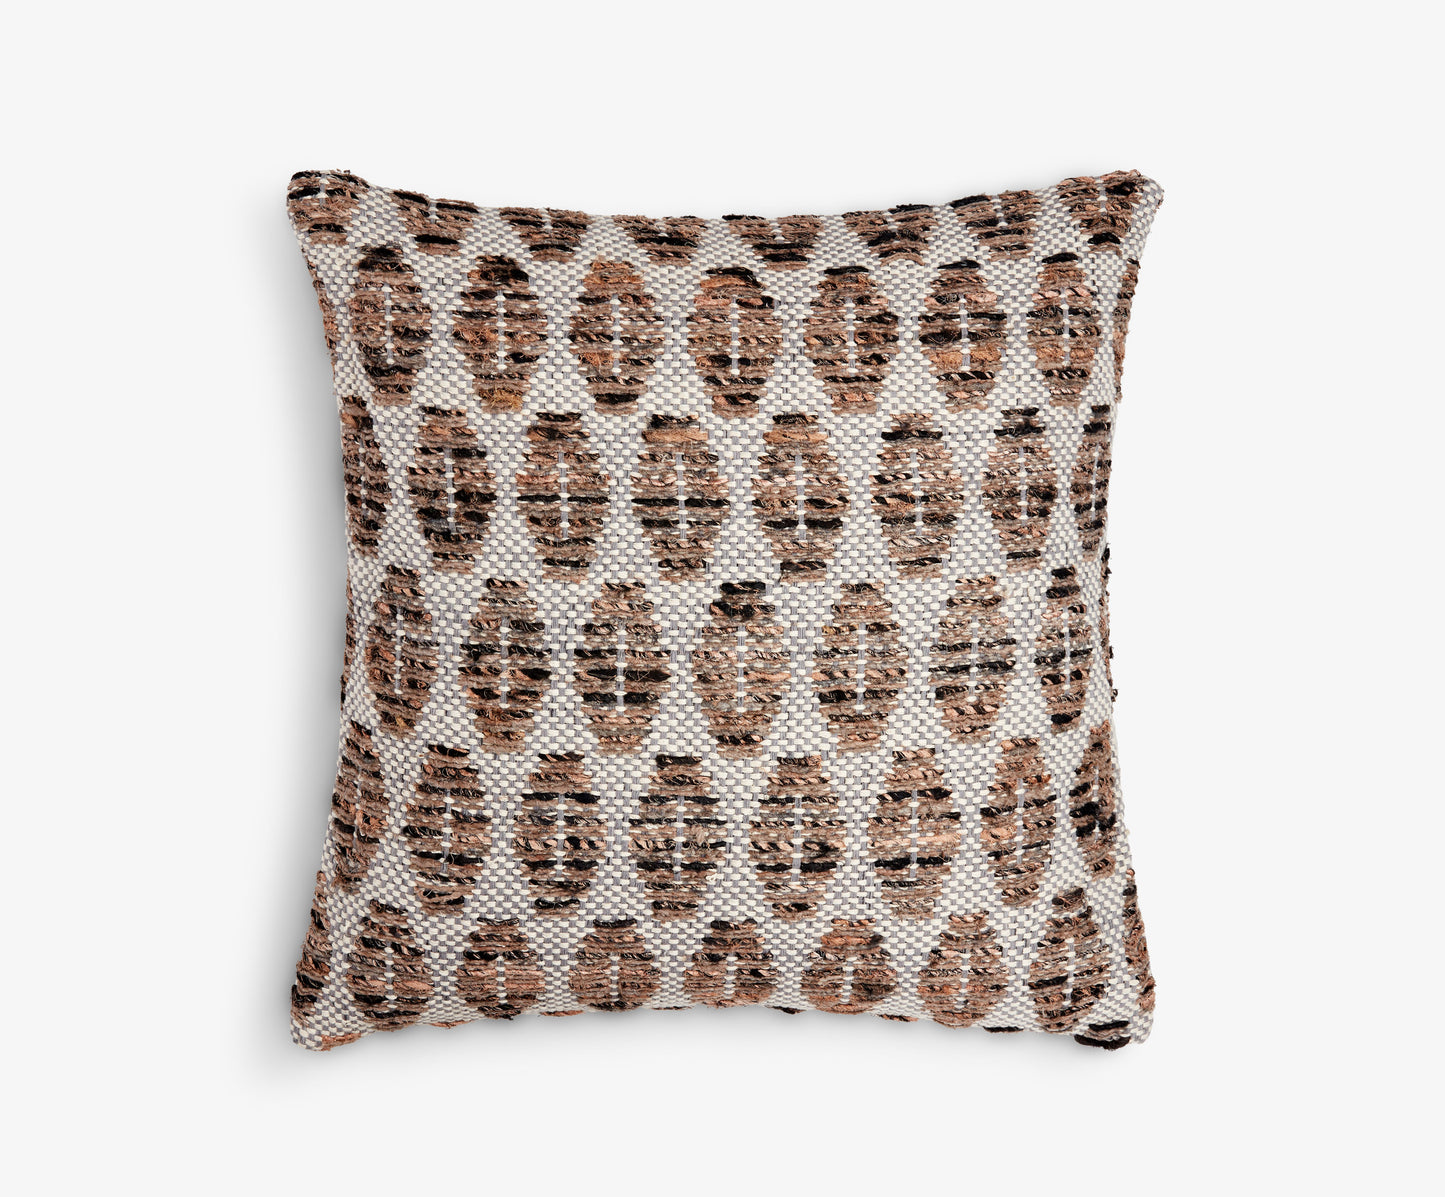 Medium Grey with Brown Ovals Square Cushion